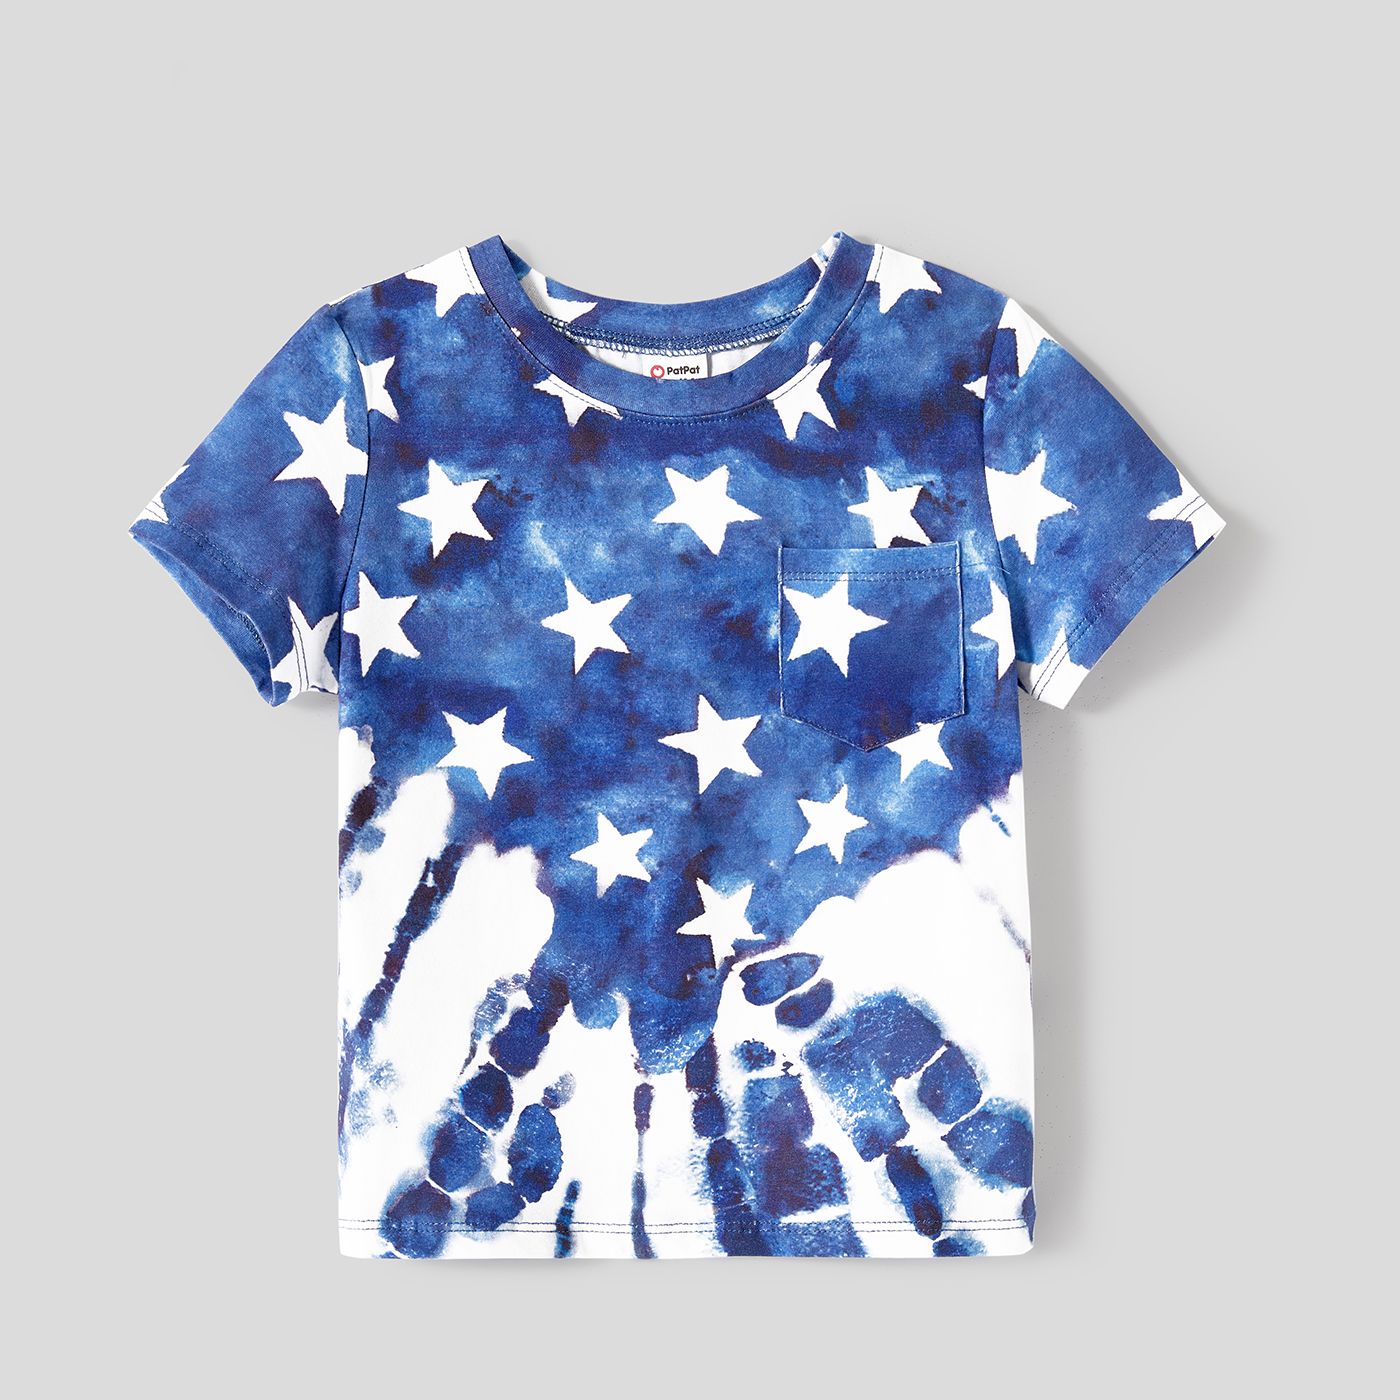 Independence Day Family Matching Cotton Star Print Spliced Colorful Mesh Cami Dresses And T-shirts Sets